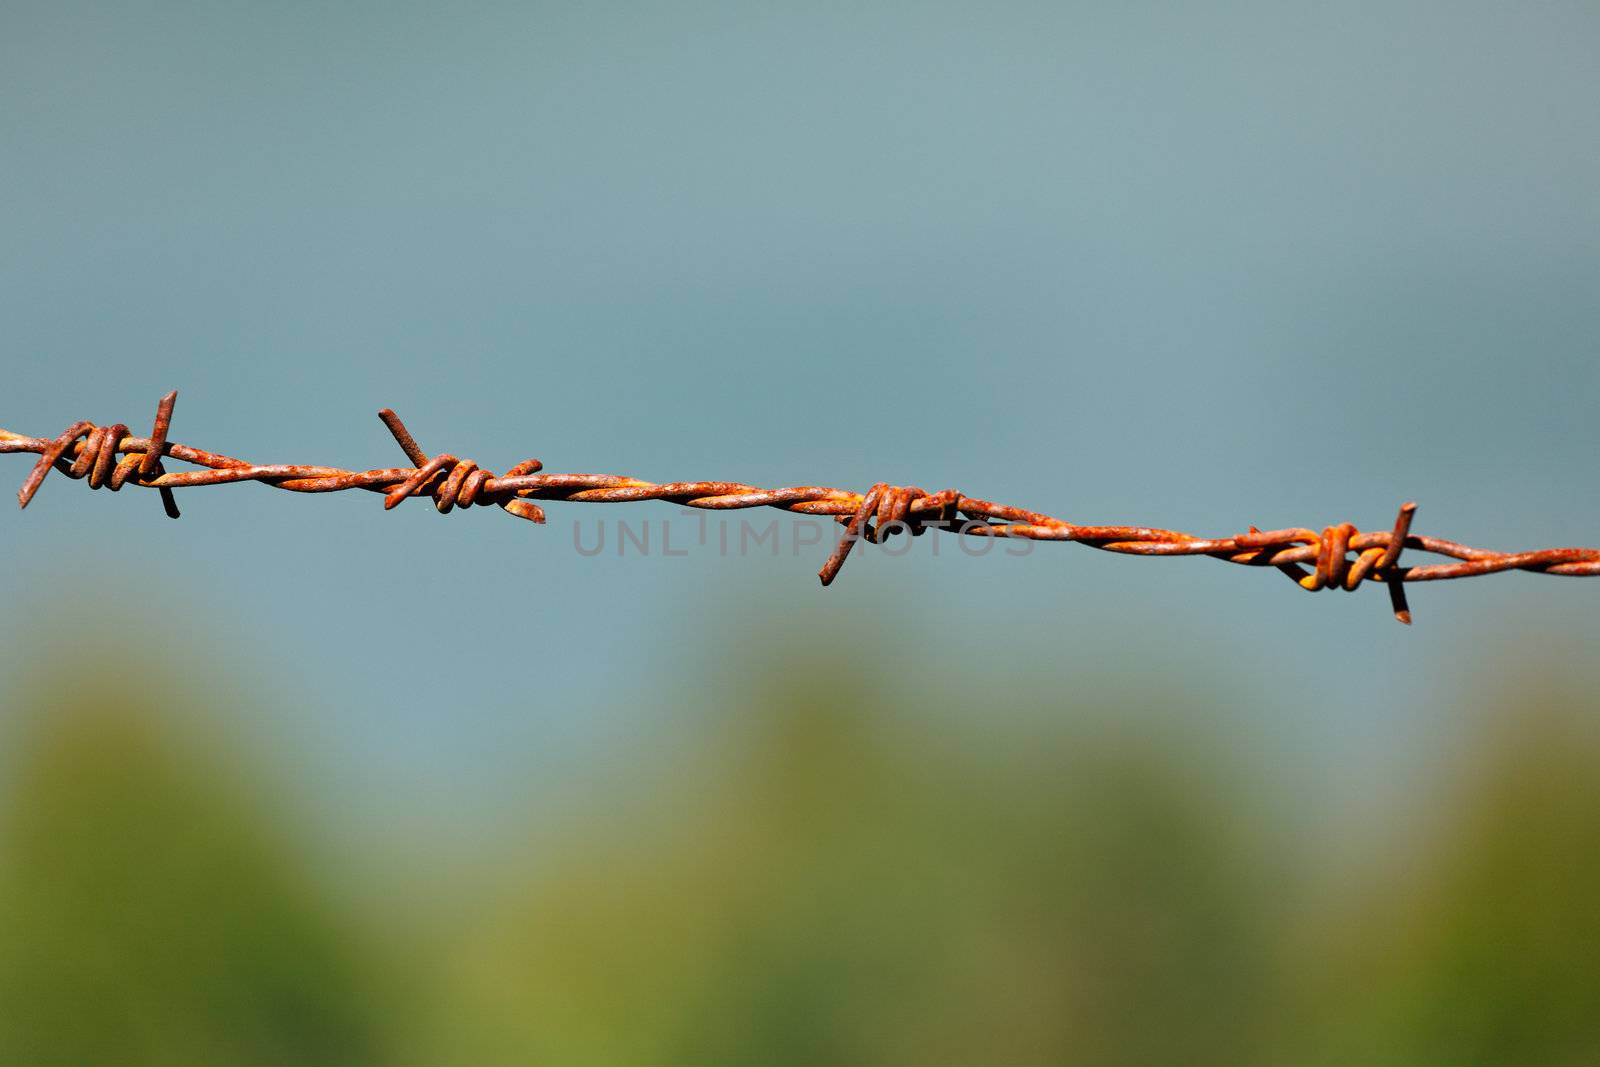 Steel barbed wire by dimol